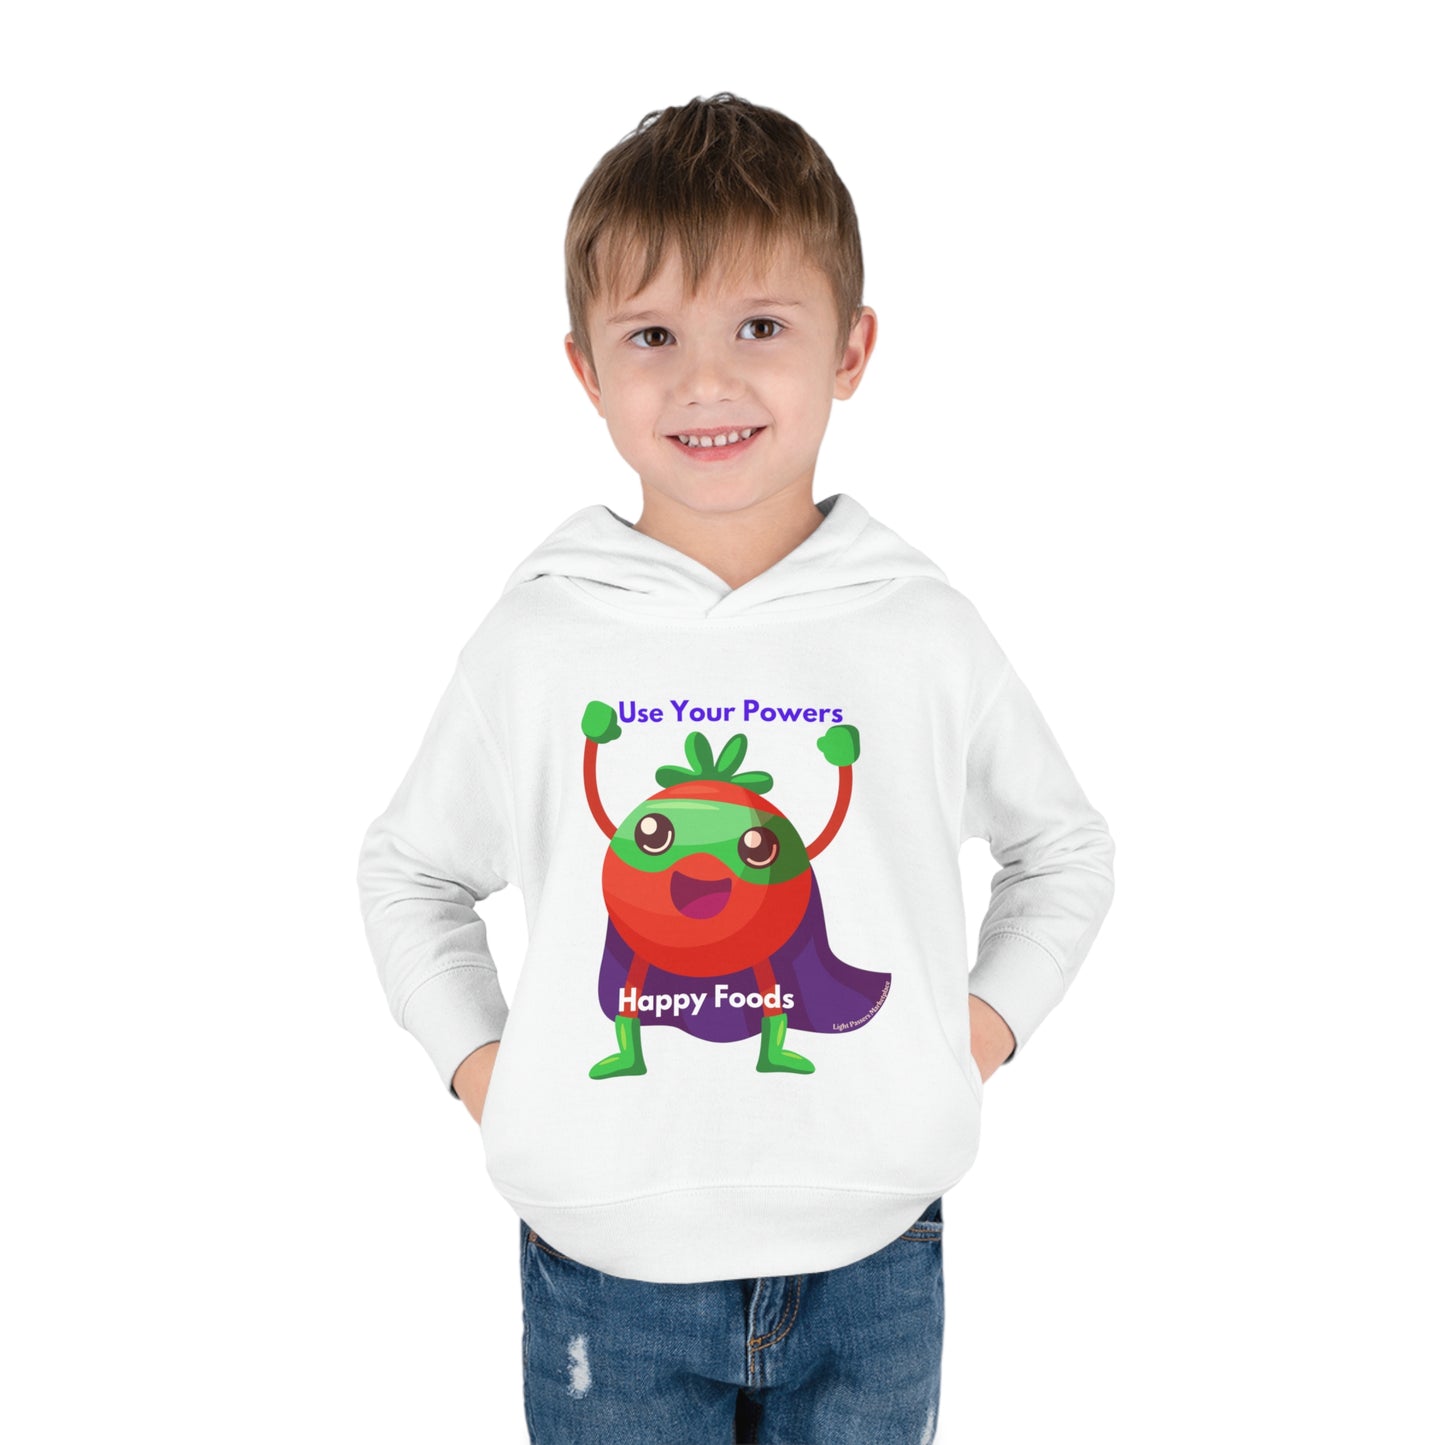 Light Passers Marketpace Tomato Power Toddler Pullover Hoodie Nutrition, Simple Messages, Mental Health